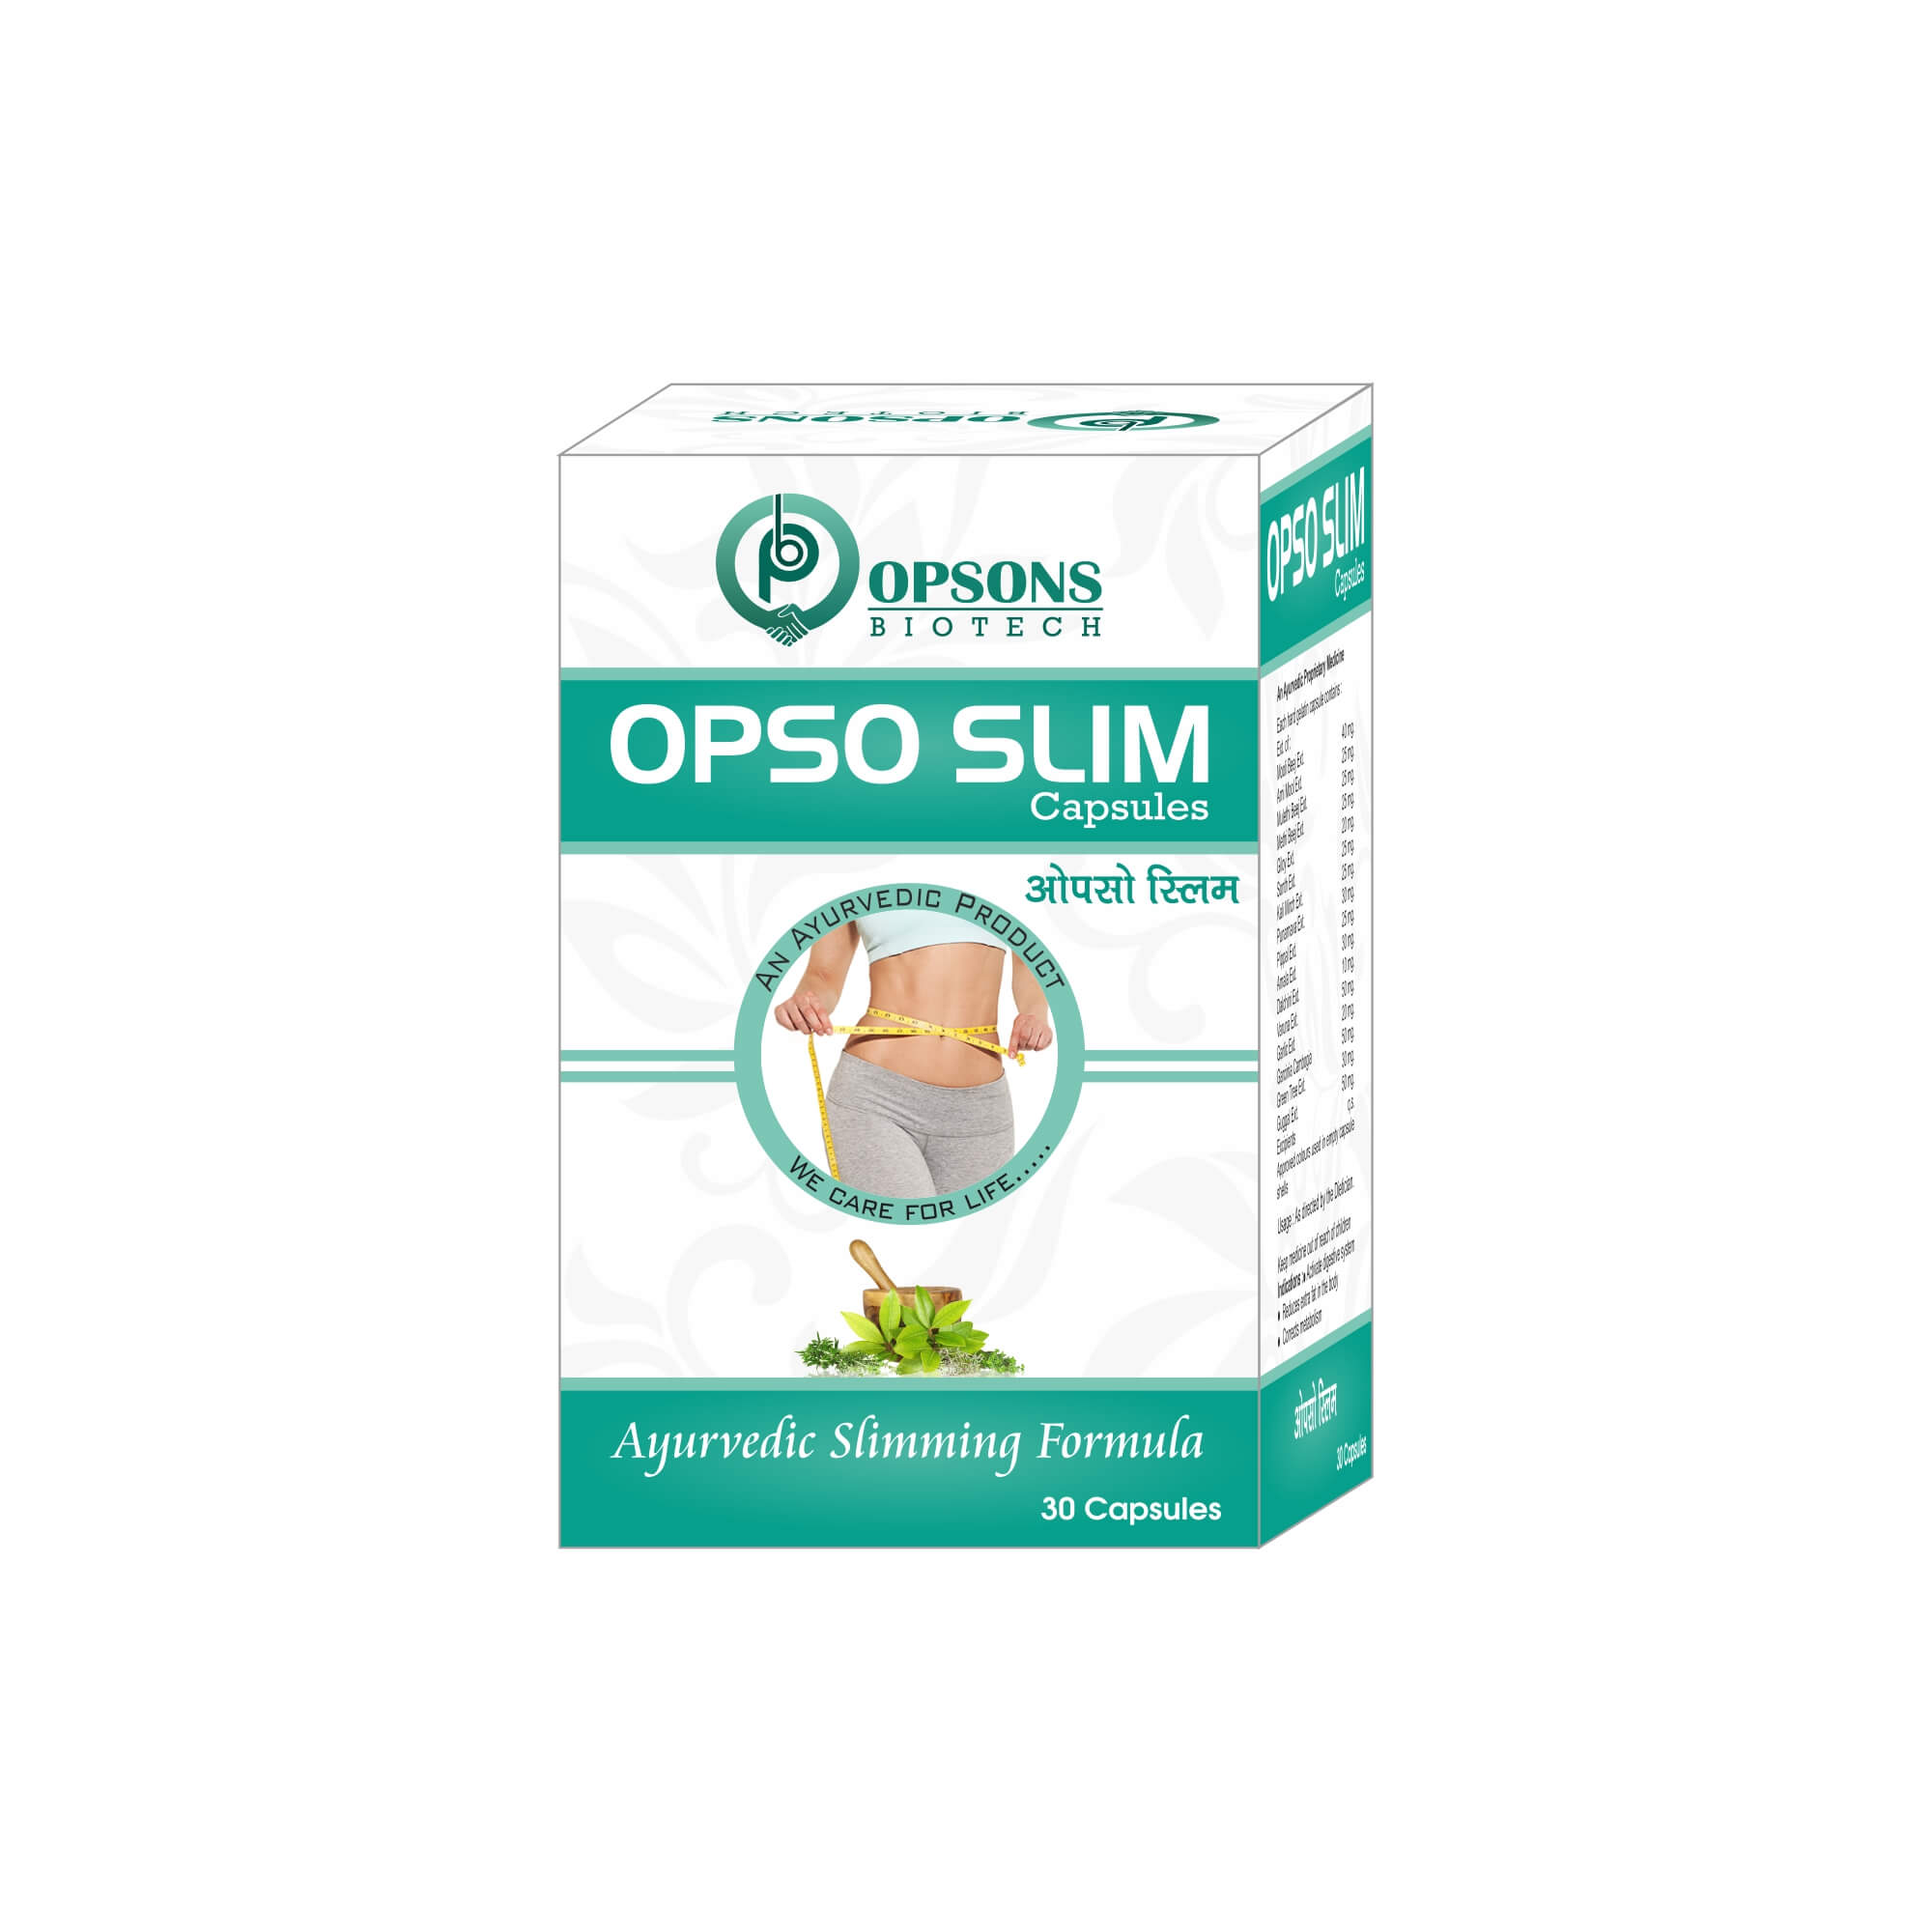 Product Name: Opso Slim Capsules, Compositions of Opso Slim Capsules are Ayurvedic Slimmimg Formulas  - Opsons Biotech